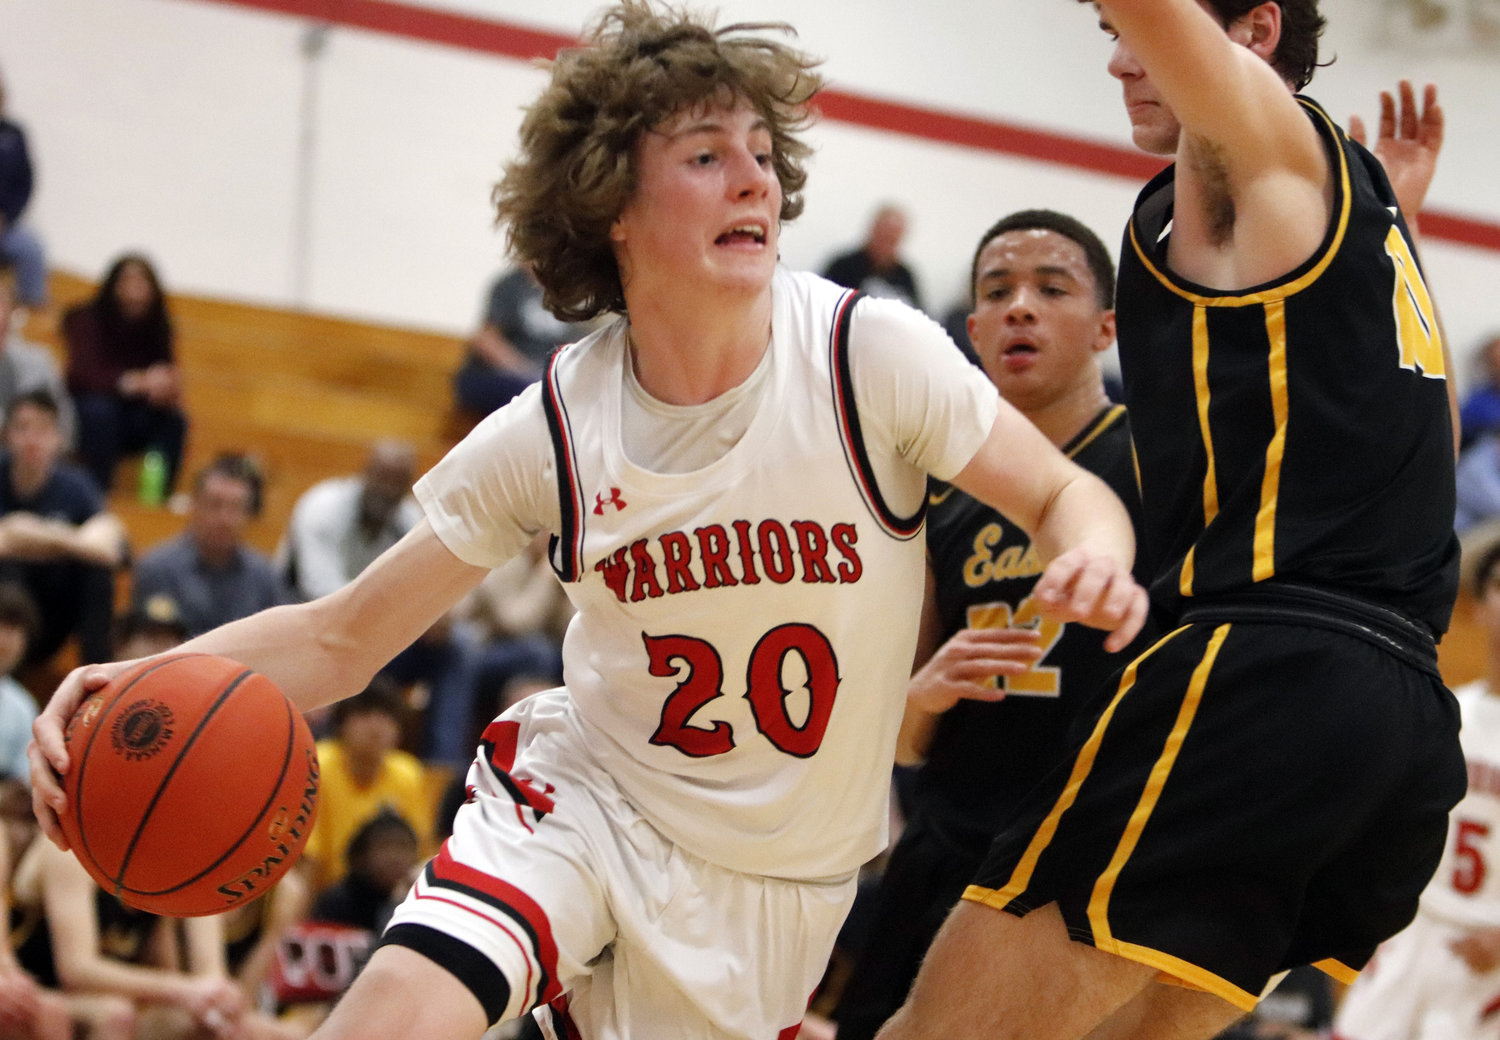 Warrenton guard Troy Anderson (left) drives towards the basket during the first half of last week’s district win over Ft. Zumwalt East. Anderson led the Warriors with 19 points in the win.